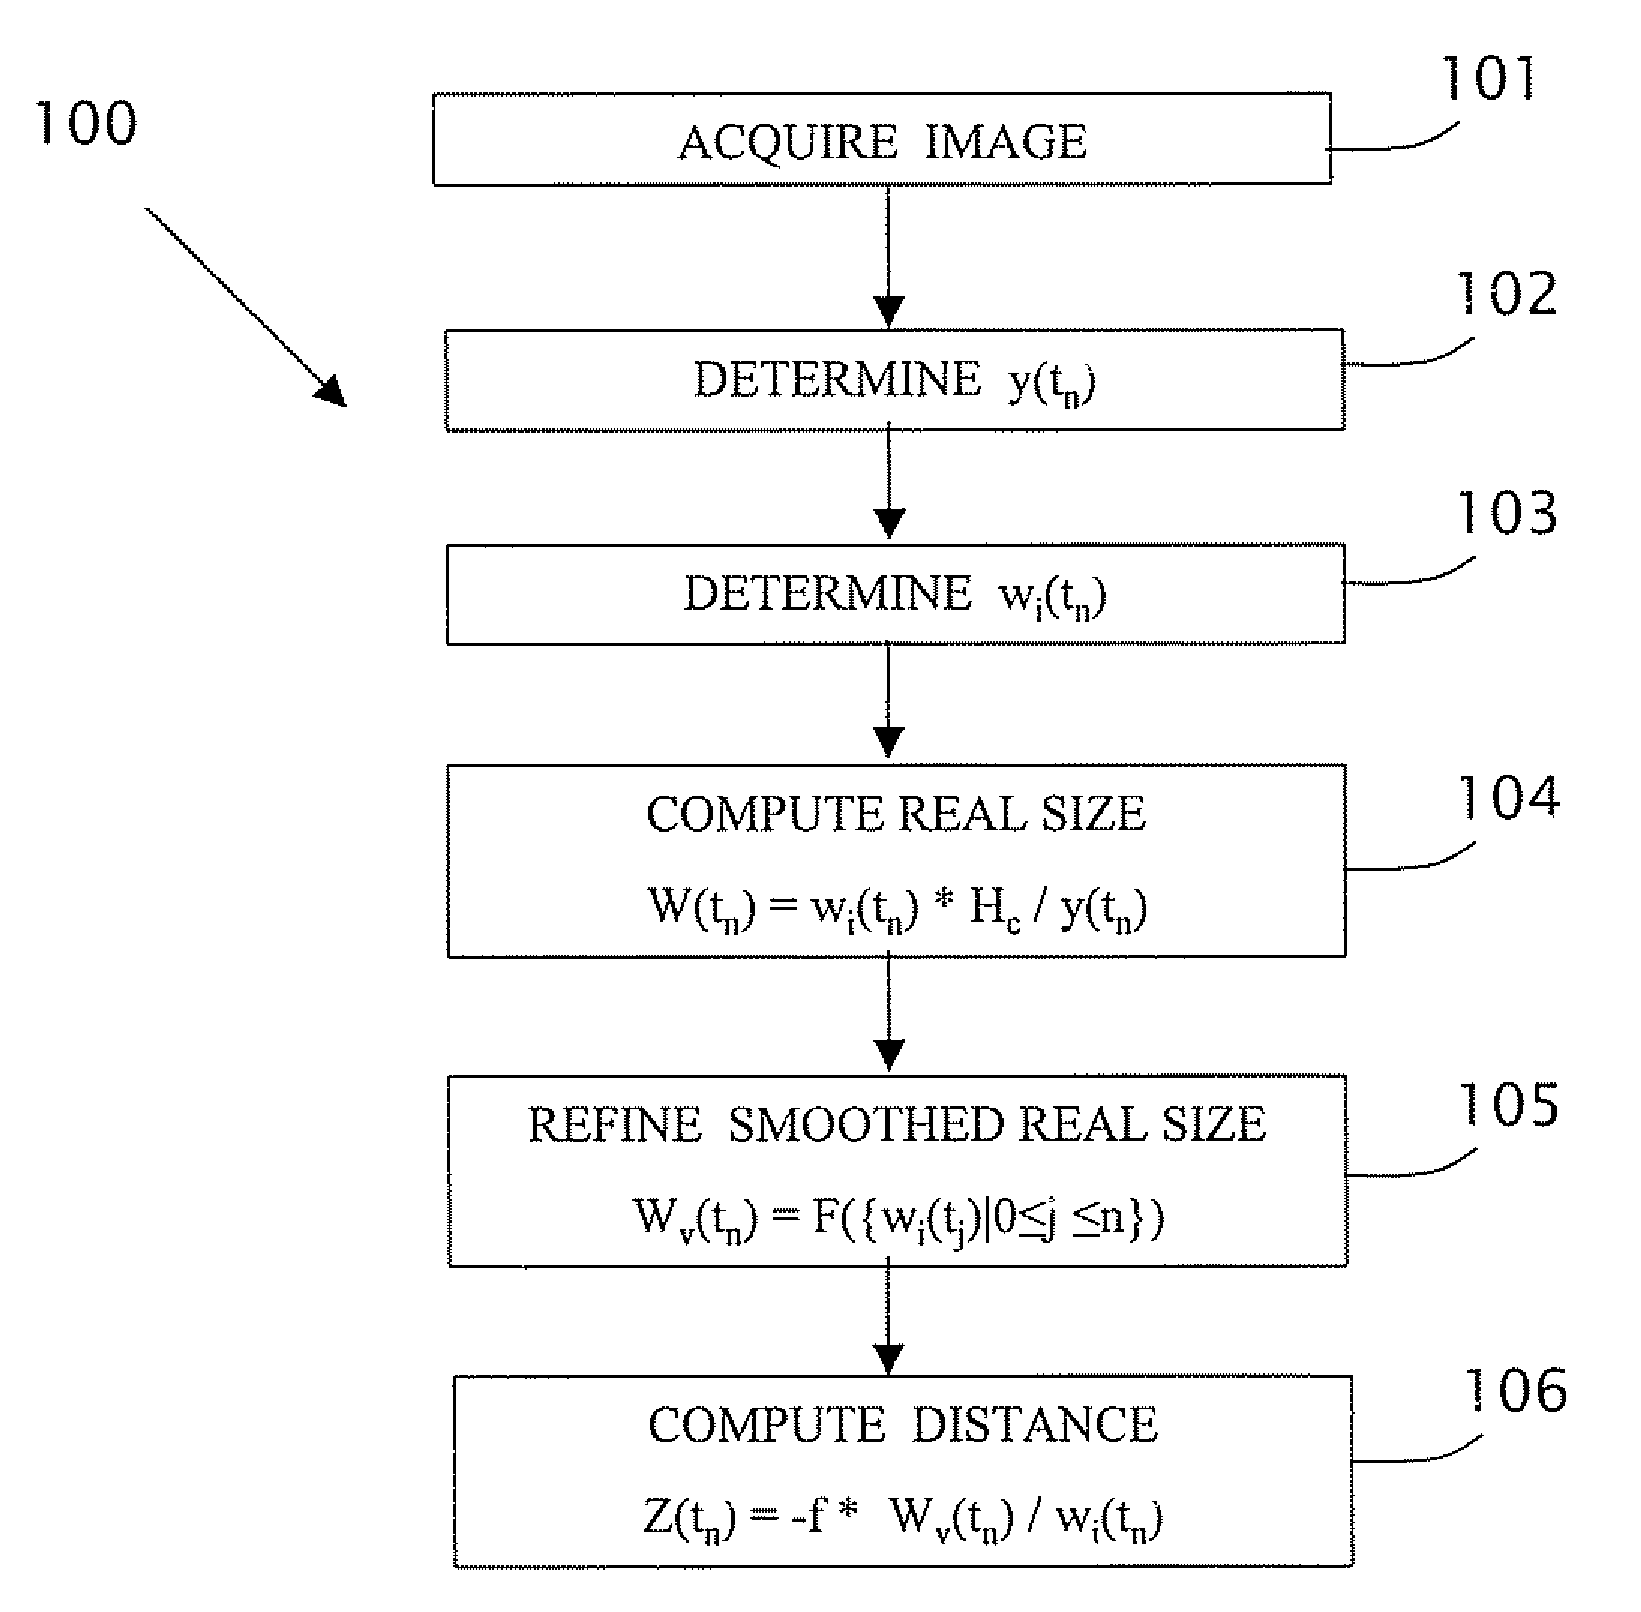 Estimating Distance To An Object Using A Sequence Of Images Recorded By A Monocular Camera